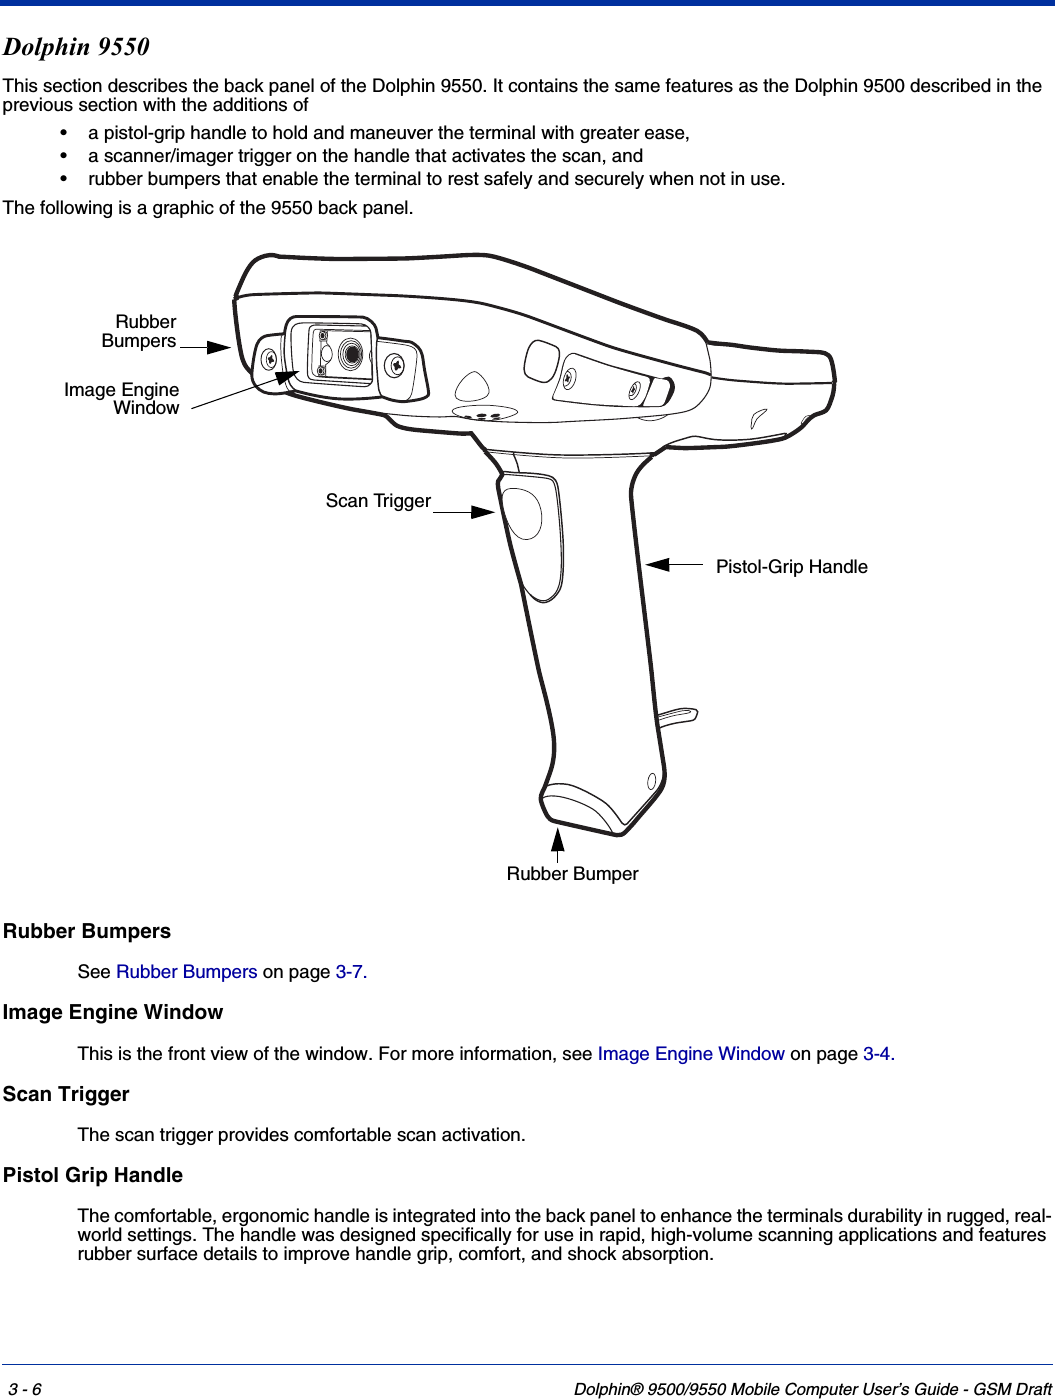 3 - 6 Dolphin® 9500/9550 Mobile Computer User’s Guide - GSM DraftDolphin 9550This section describes the back panel of the Dolphin 9550. It contains the same features as the Dolphin 9500 described in the previous section with the additions of • a pistol-grip handle to hold and maneuver the terminal with greater ease,• a scanner/imager trigger on the handle that activates the scan, and• rubber bumpers that enable the terminal to rest safely and securely when not in use.The following is a graphic of the 9550 back panel. Rubber BumpersSee Rubber Bumpers on page 3-7.Image Engine WindowThis is the front view of the window. For more information, see Image Engine Window on page 3-4.Scan TriggerThe scan trigger provides comfortable scan activation.Pistol Grip HandleThe comfortable, ergonomic handle is integrated into the back panel to enhance the terminals durability in rugged, real-world settings. The handle was designed specifically for use in rapid, high-volume scanning applications and features rubber surface details to improve handle grip, comfort, and shock absorption.RubberBumpersPistol-Grip HandleScan TriggerRubber BumperImage EngineWindow